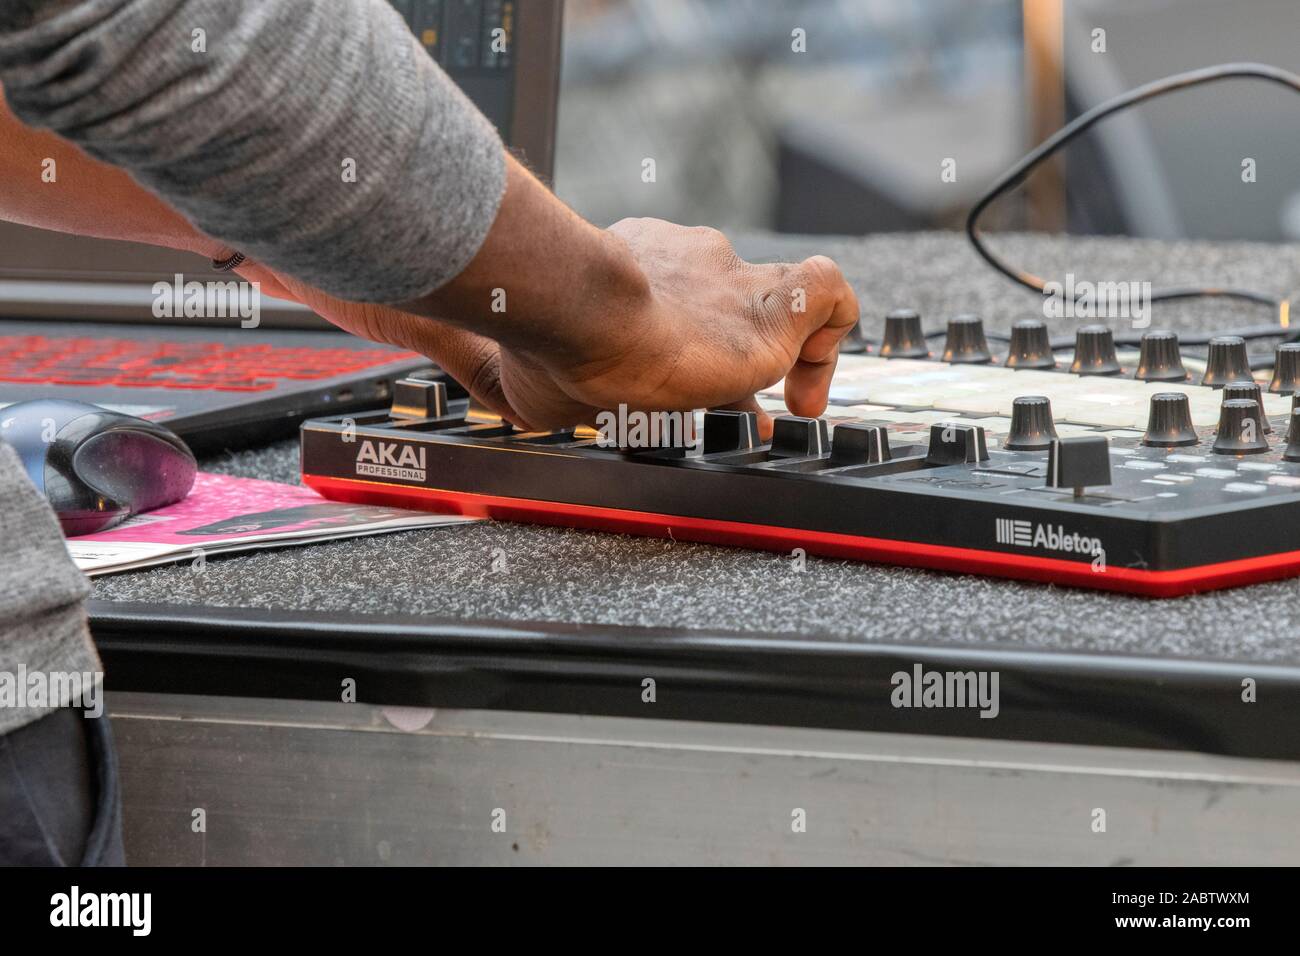 Close Up Of A Akai Professional Ableton Mixer At Amsterdam The Netherlands  2019 Stock Photo - Alamy